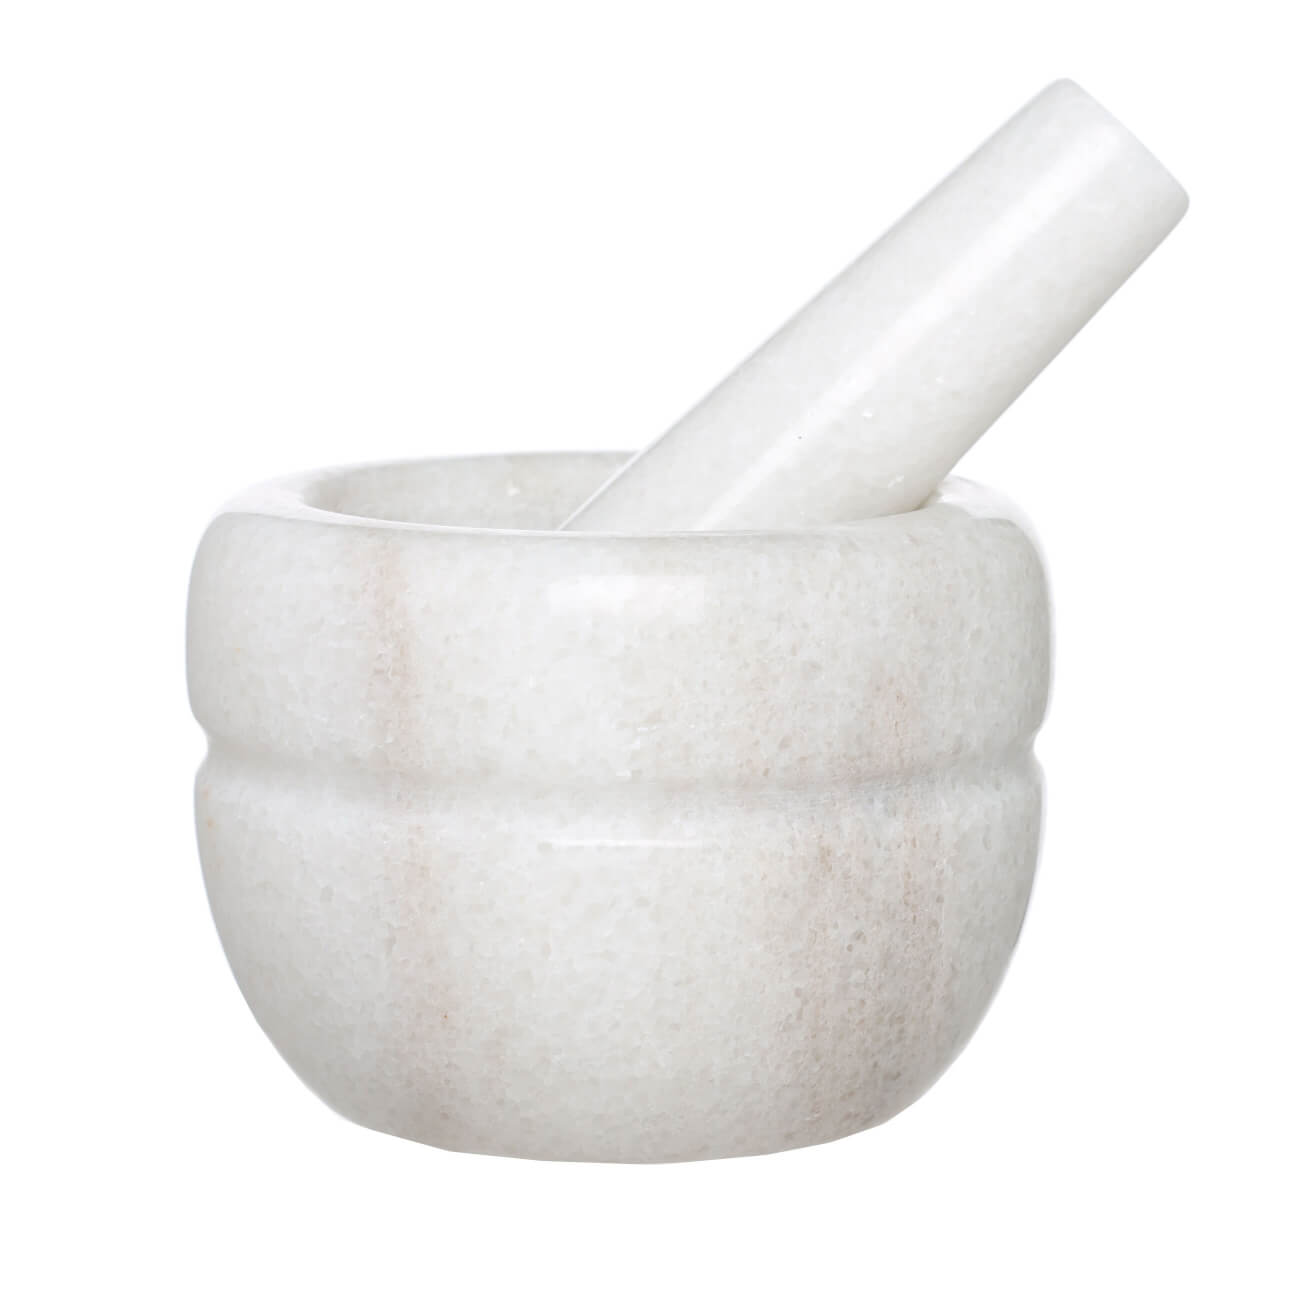 Spice mortar, 10 cm, with pestle, Marble, White, Stripe, Marble изображение № 1